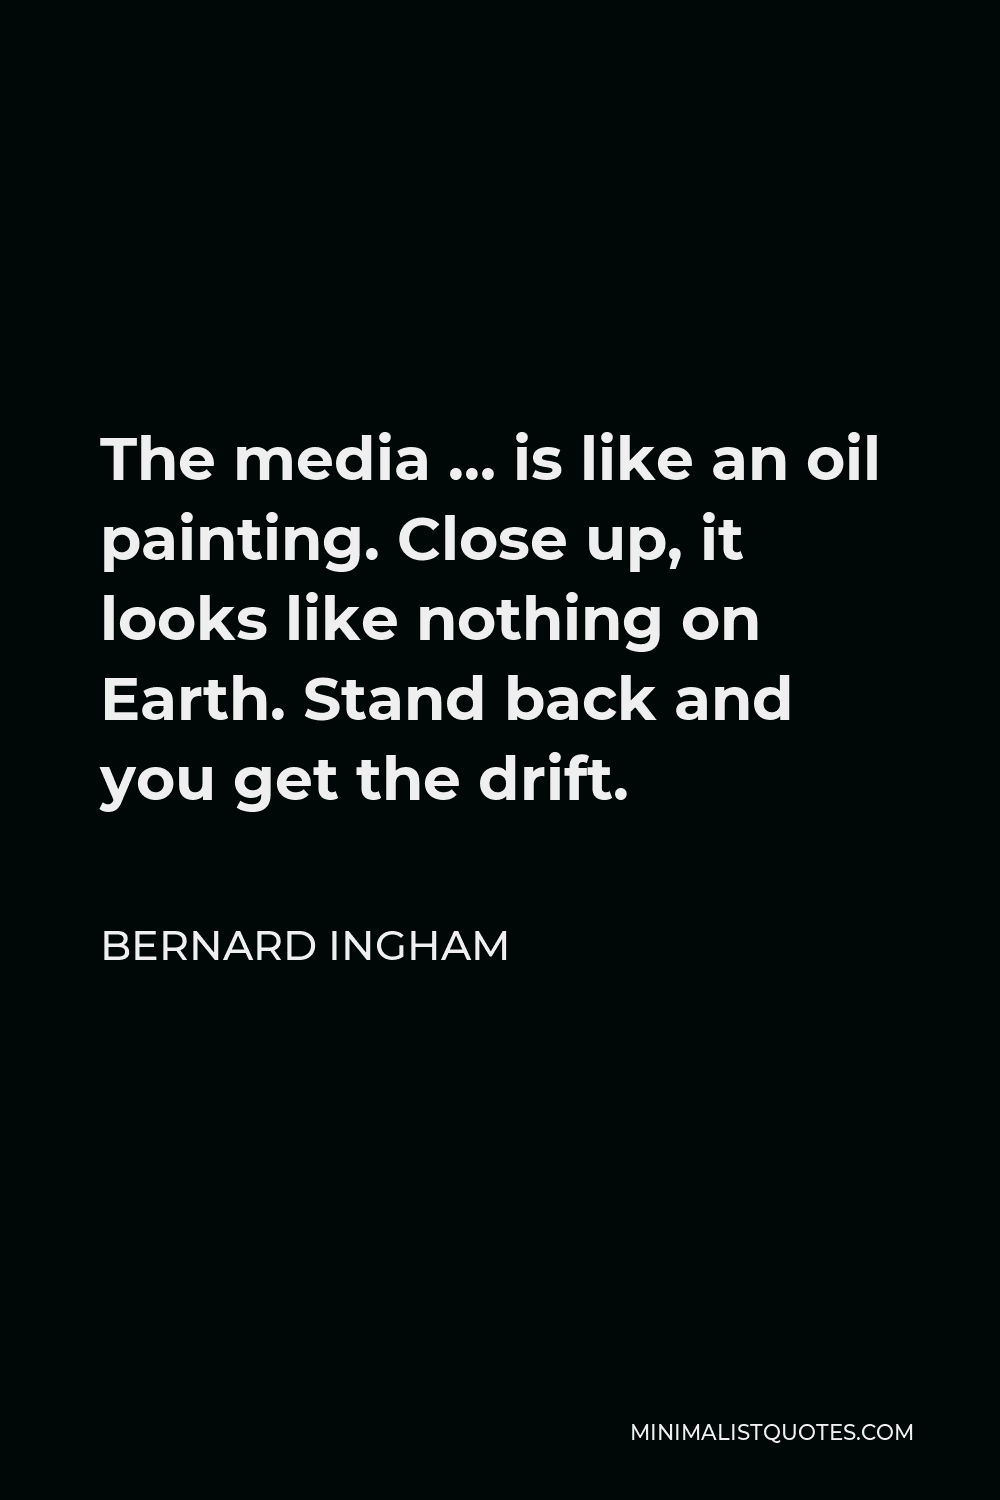 Bernard Ingham Quote - The media … is like an oil painting. Close up, it looks like nothing on Earth. Stand back and you get the drift.